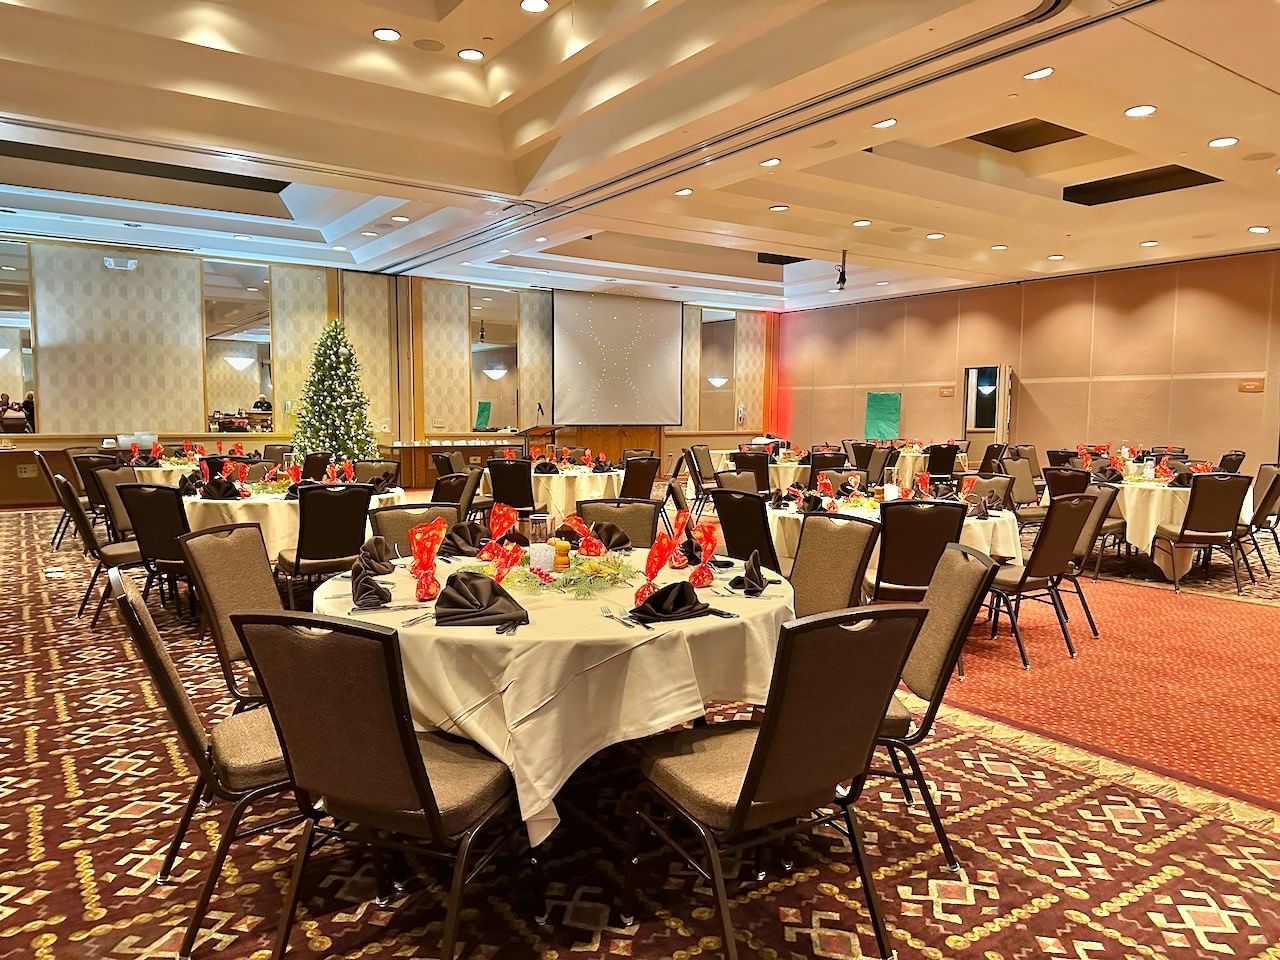 Mountain Ballroom set up for a banquet with round tables